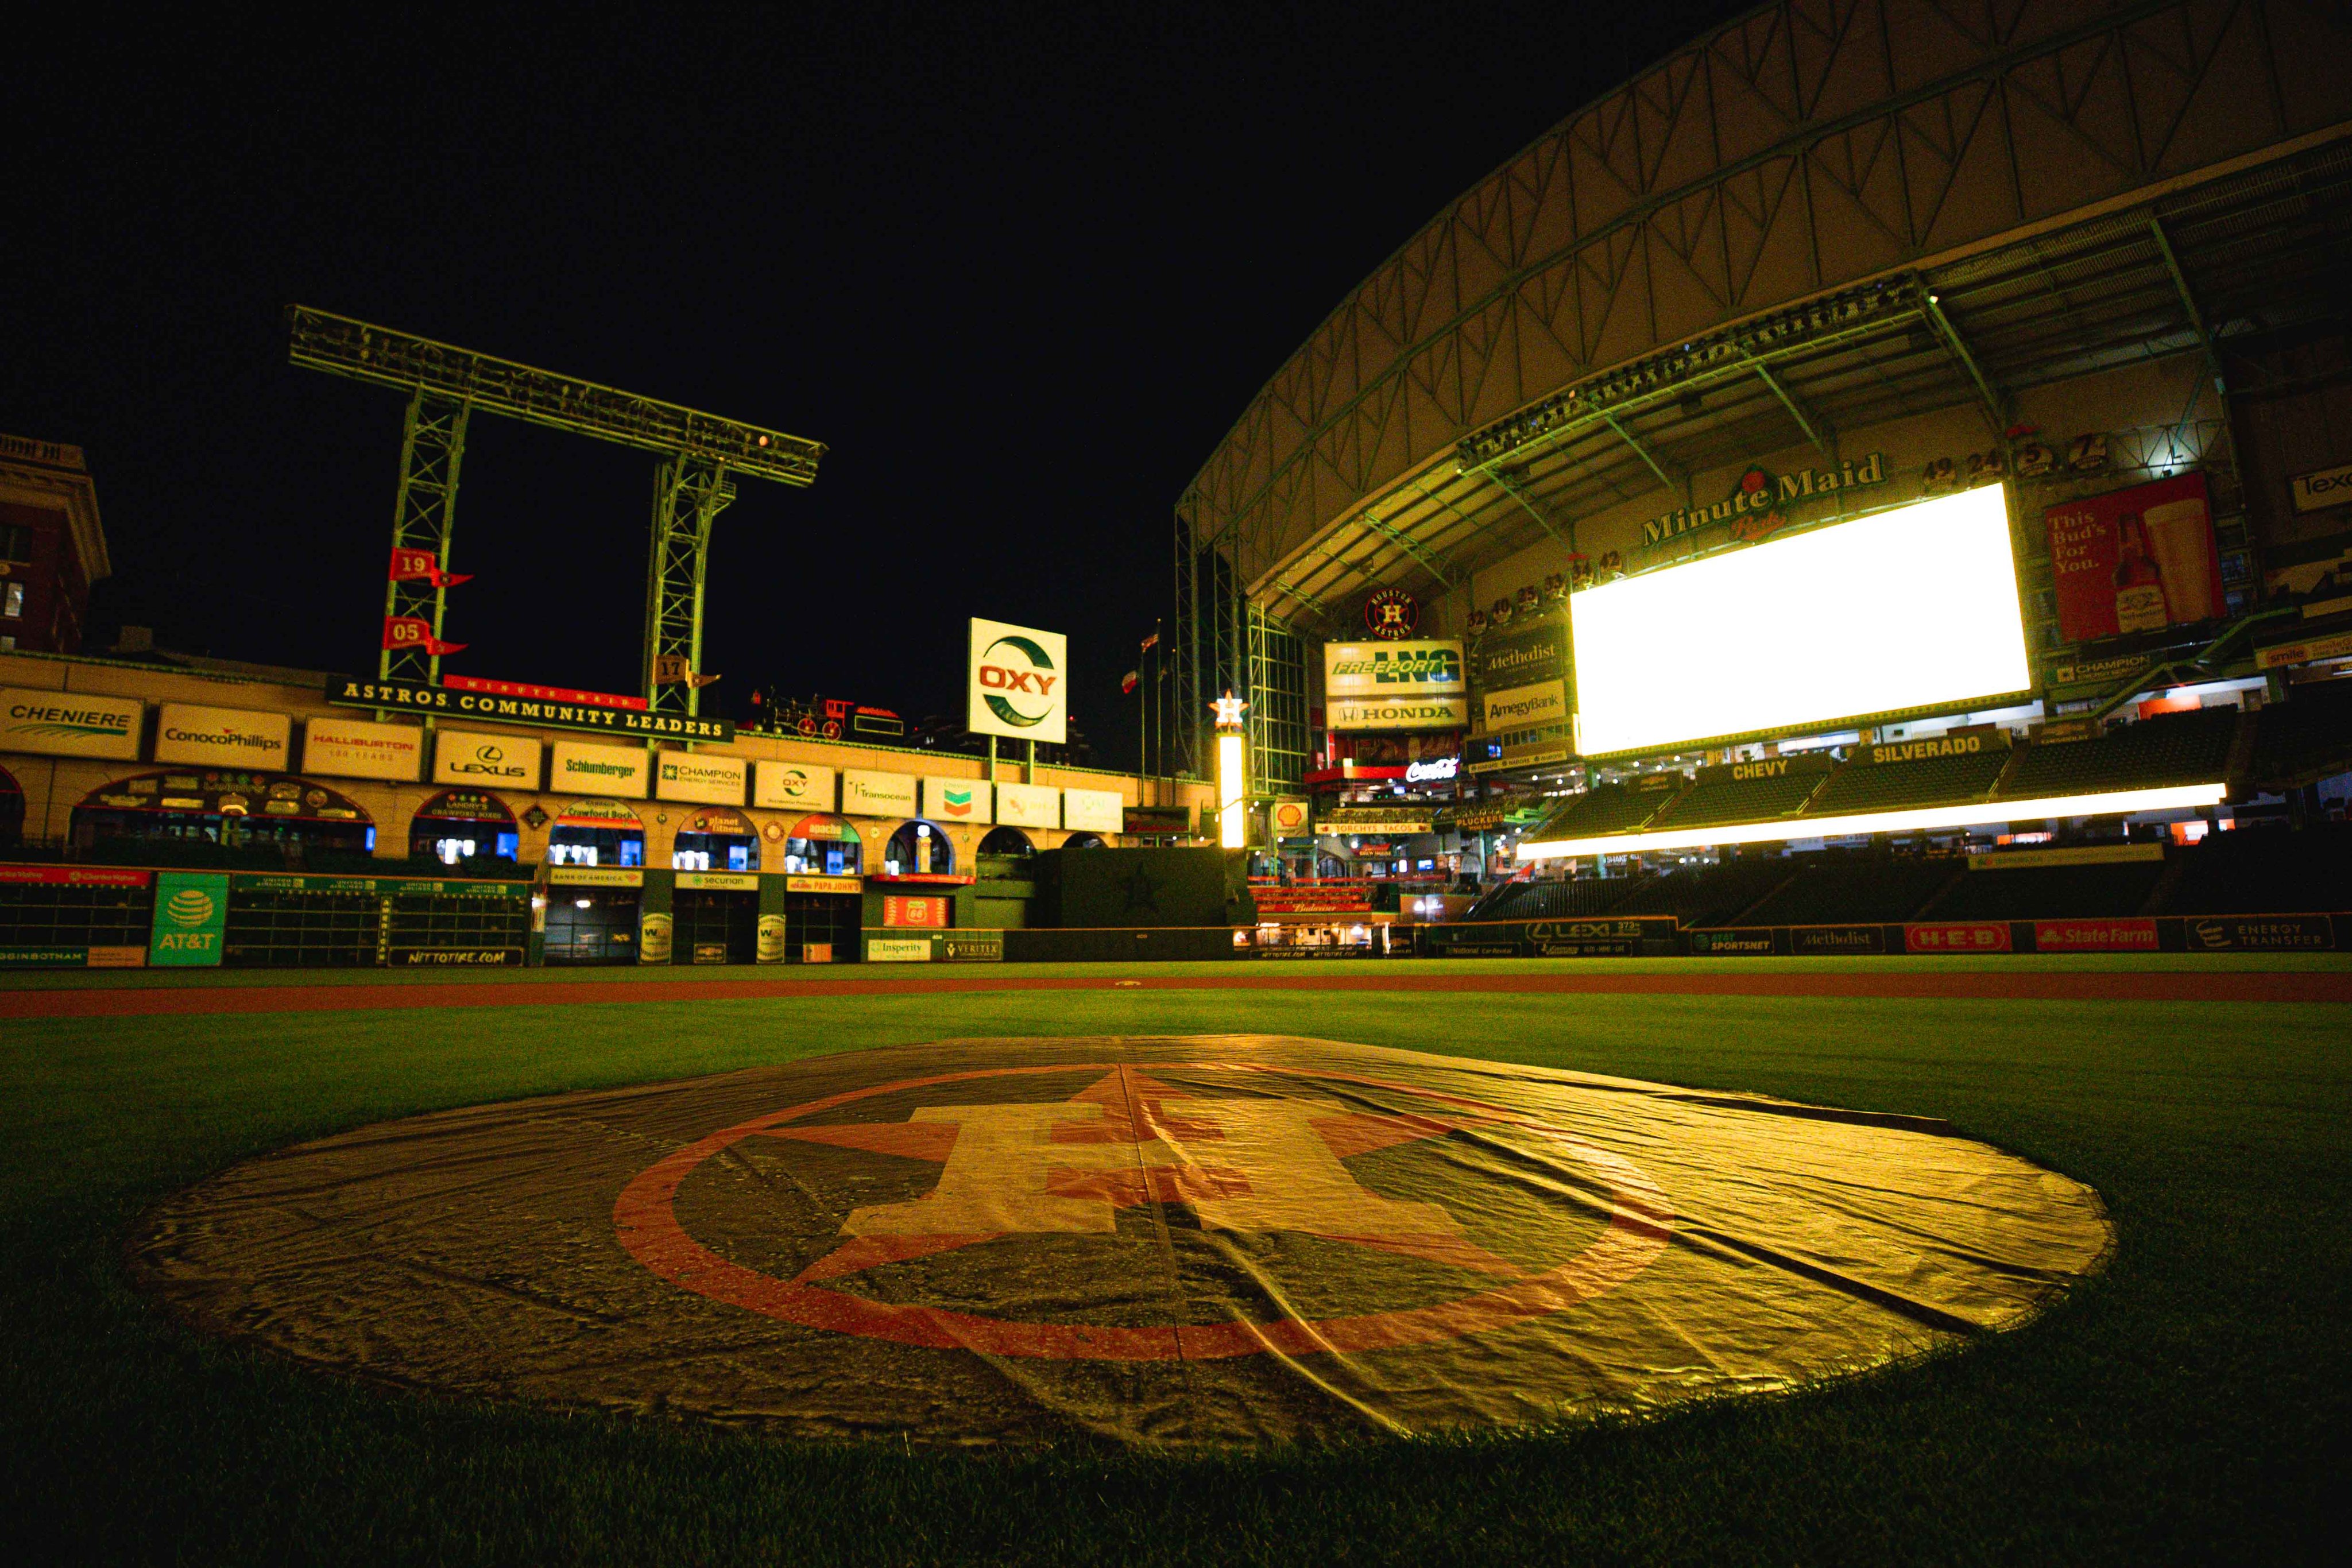 Houston Astros on X: Tonight we light up Minute Maid Park in honor of  lives lost to COVID-19. Our condolences go out to our fans & their  loved ones. As we look